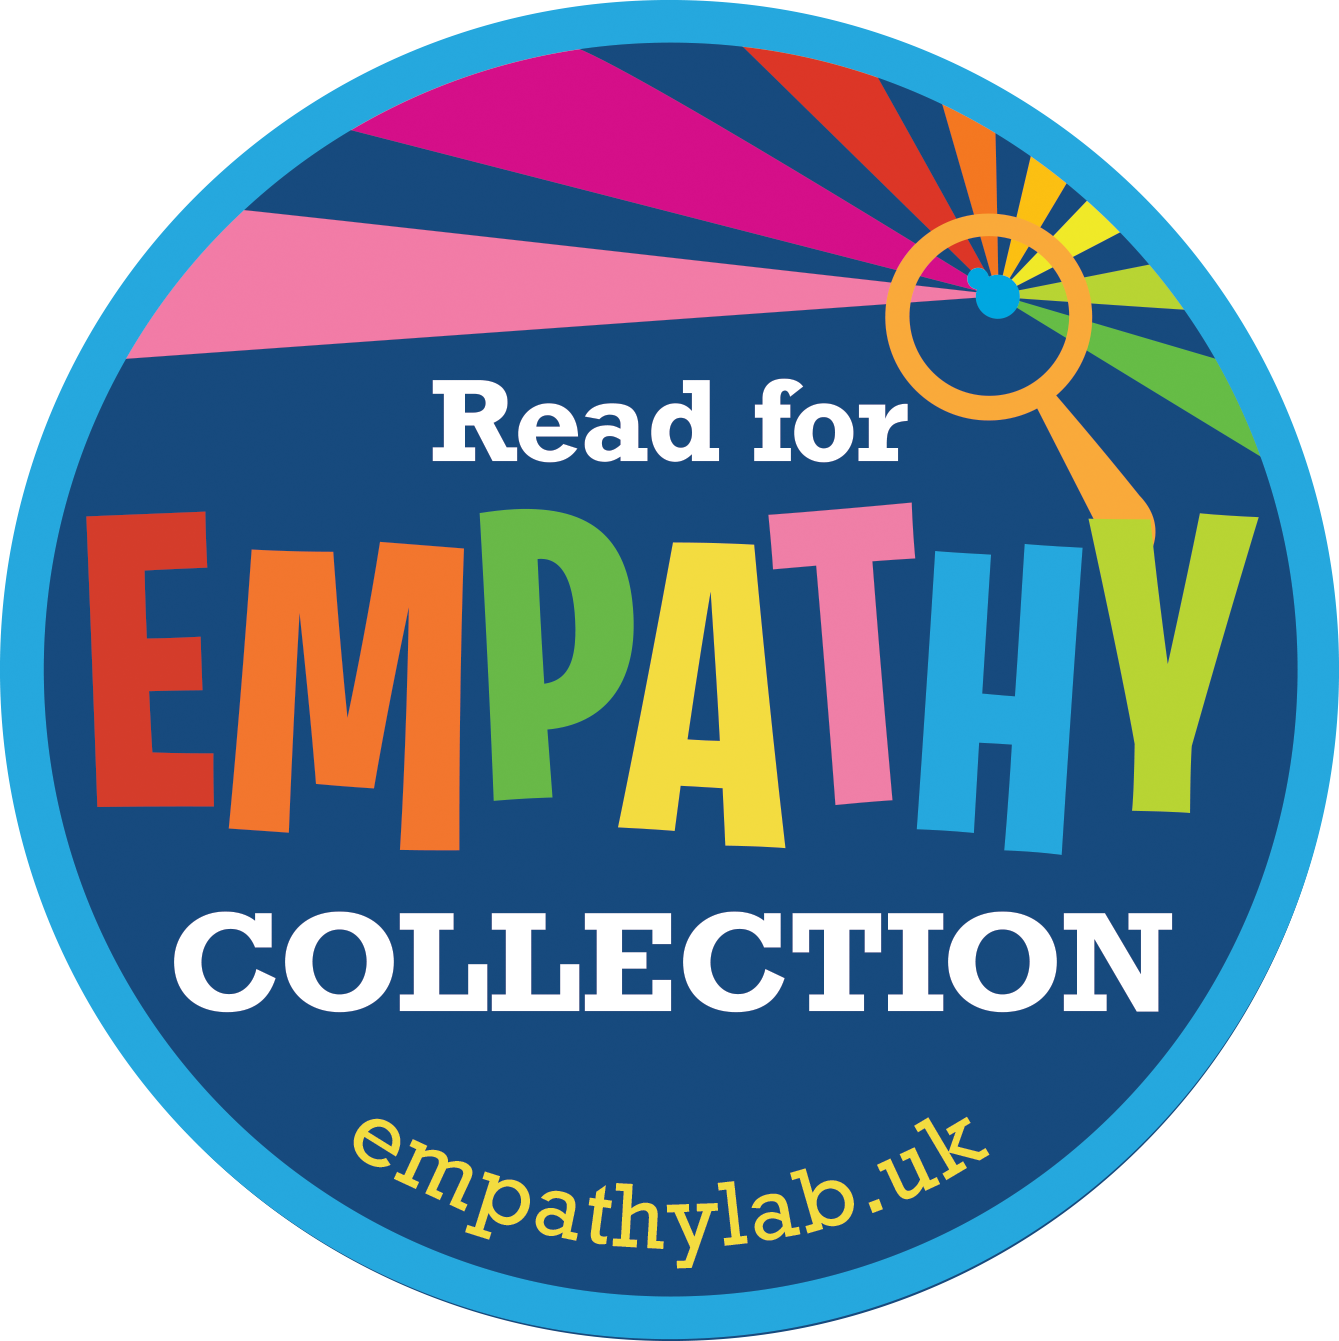 Read for Empathy Collection book packs logo